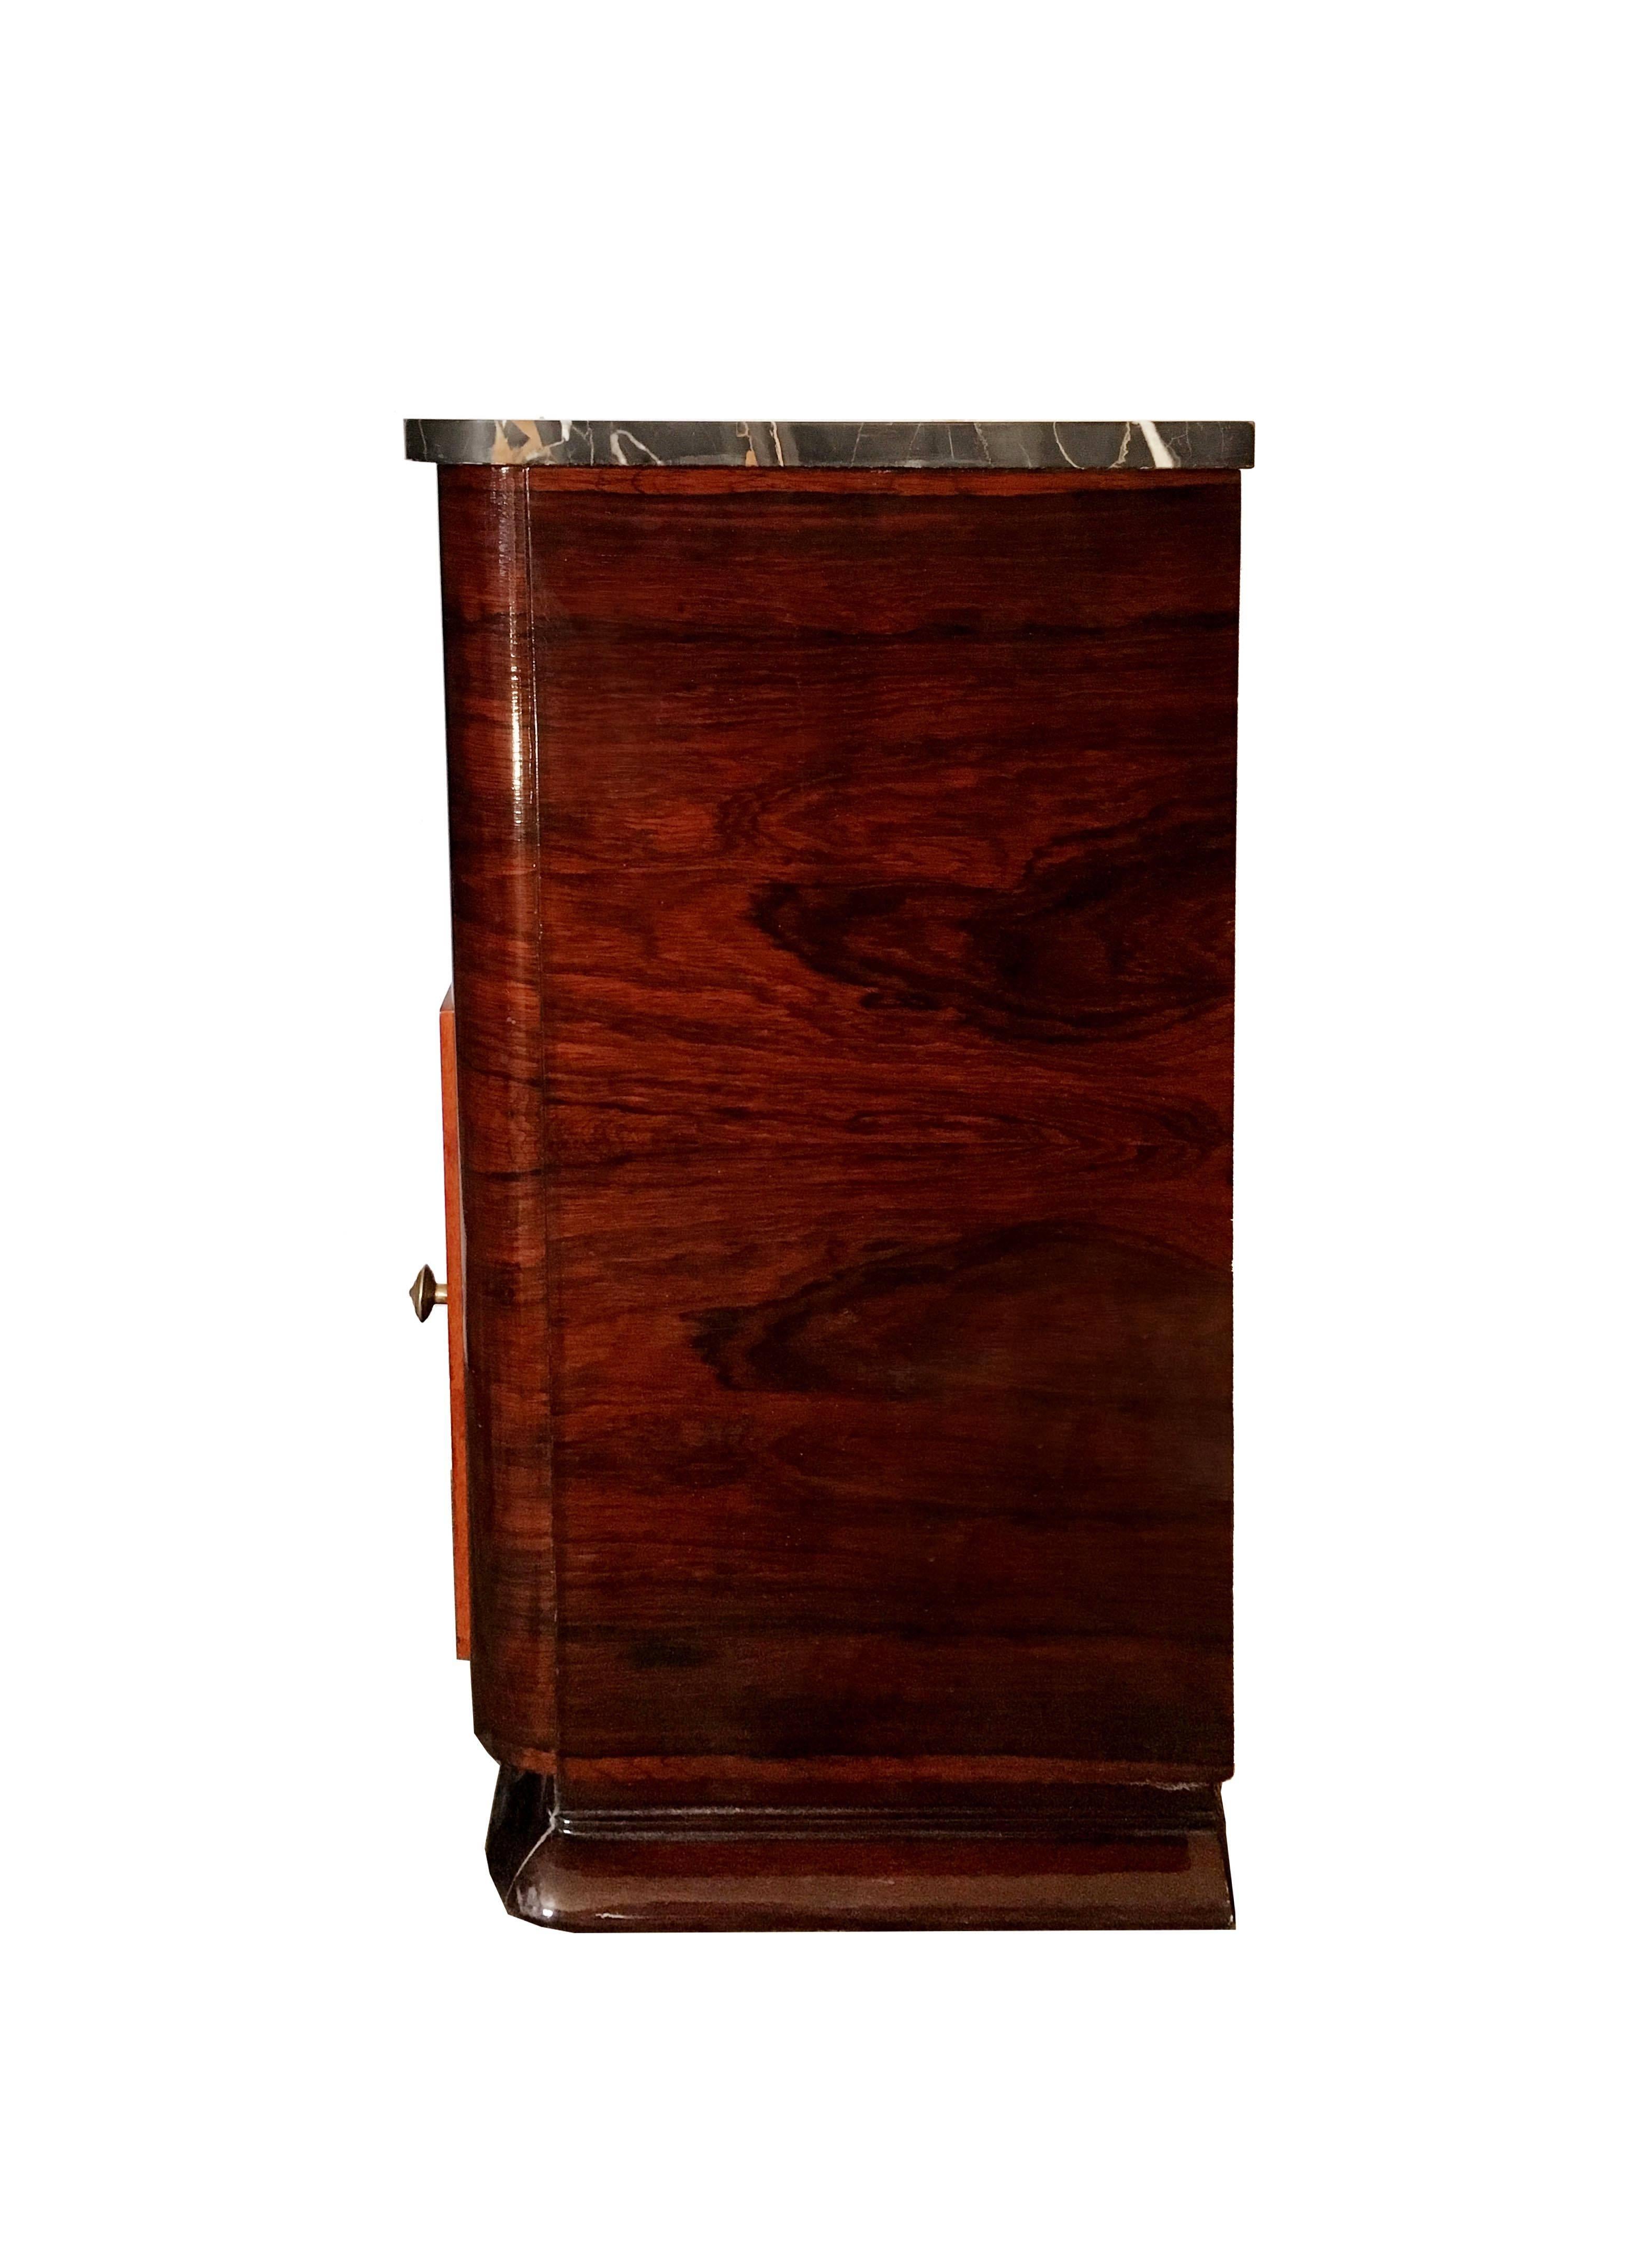 Beautiful cabinet in solid mahogany and rich rosewood veneer. The case contains to drawers, and a door opens to a larger storage space below. Original brass pulls and marble top, which is a stunning cut of thick 